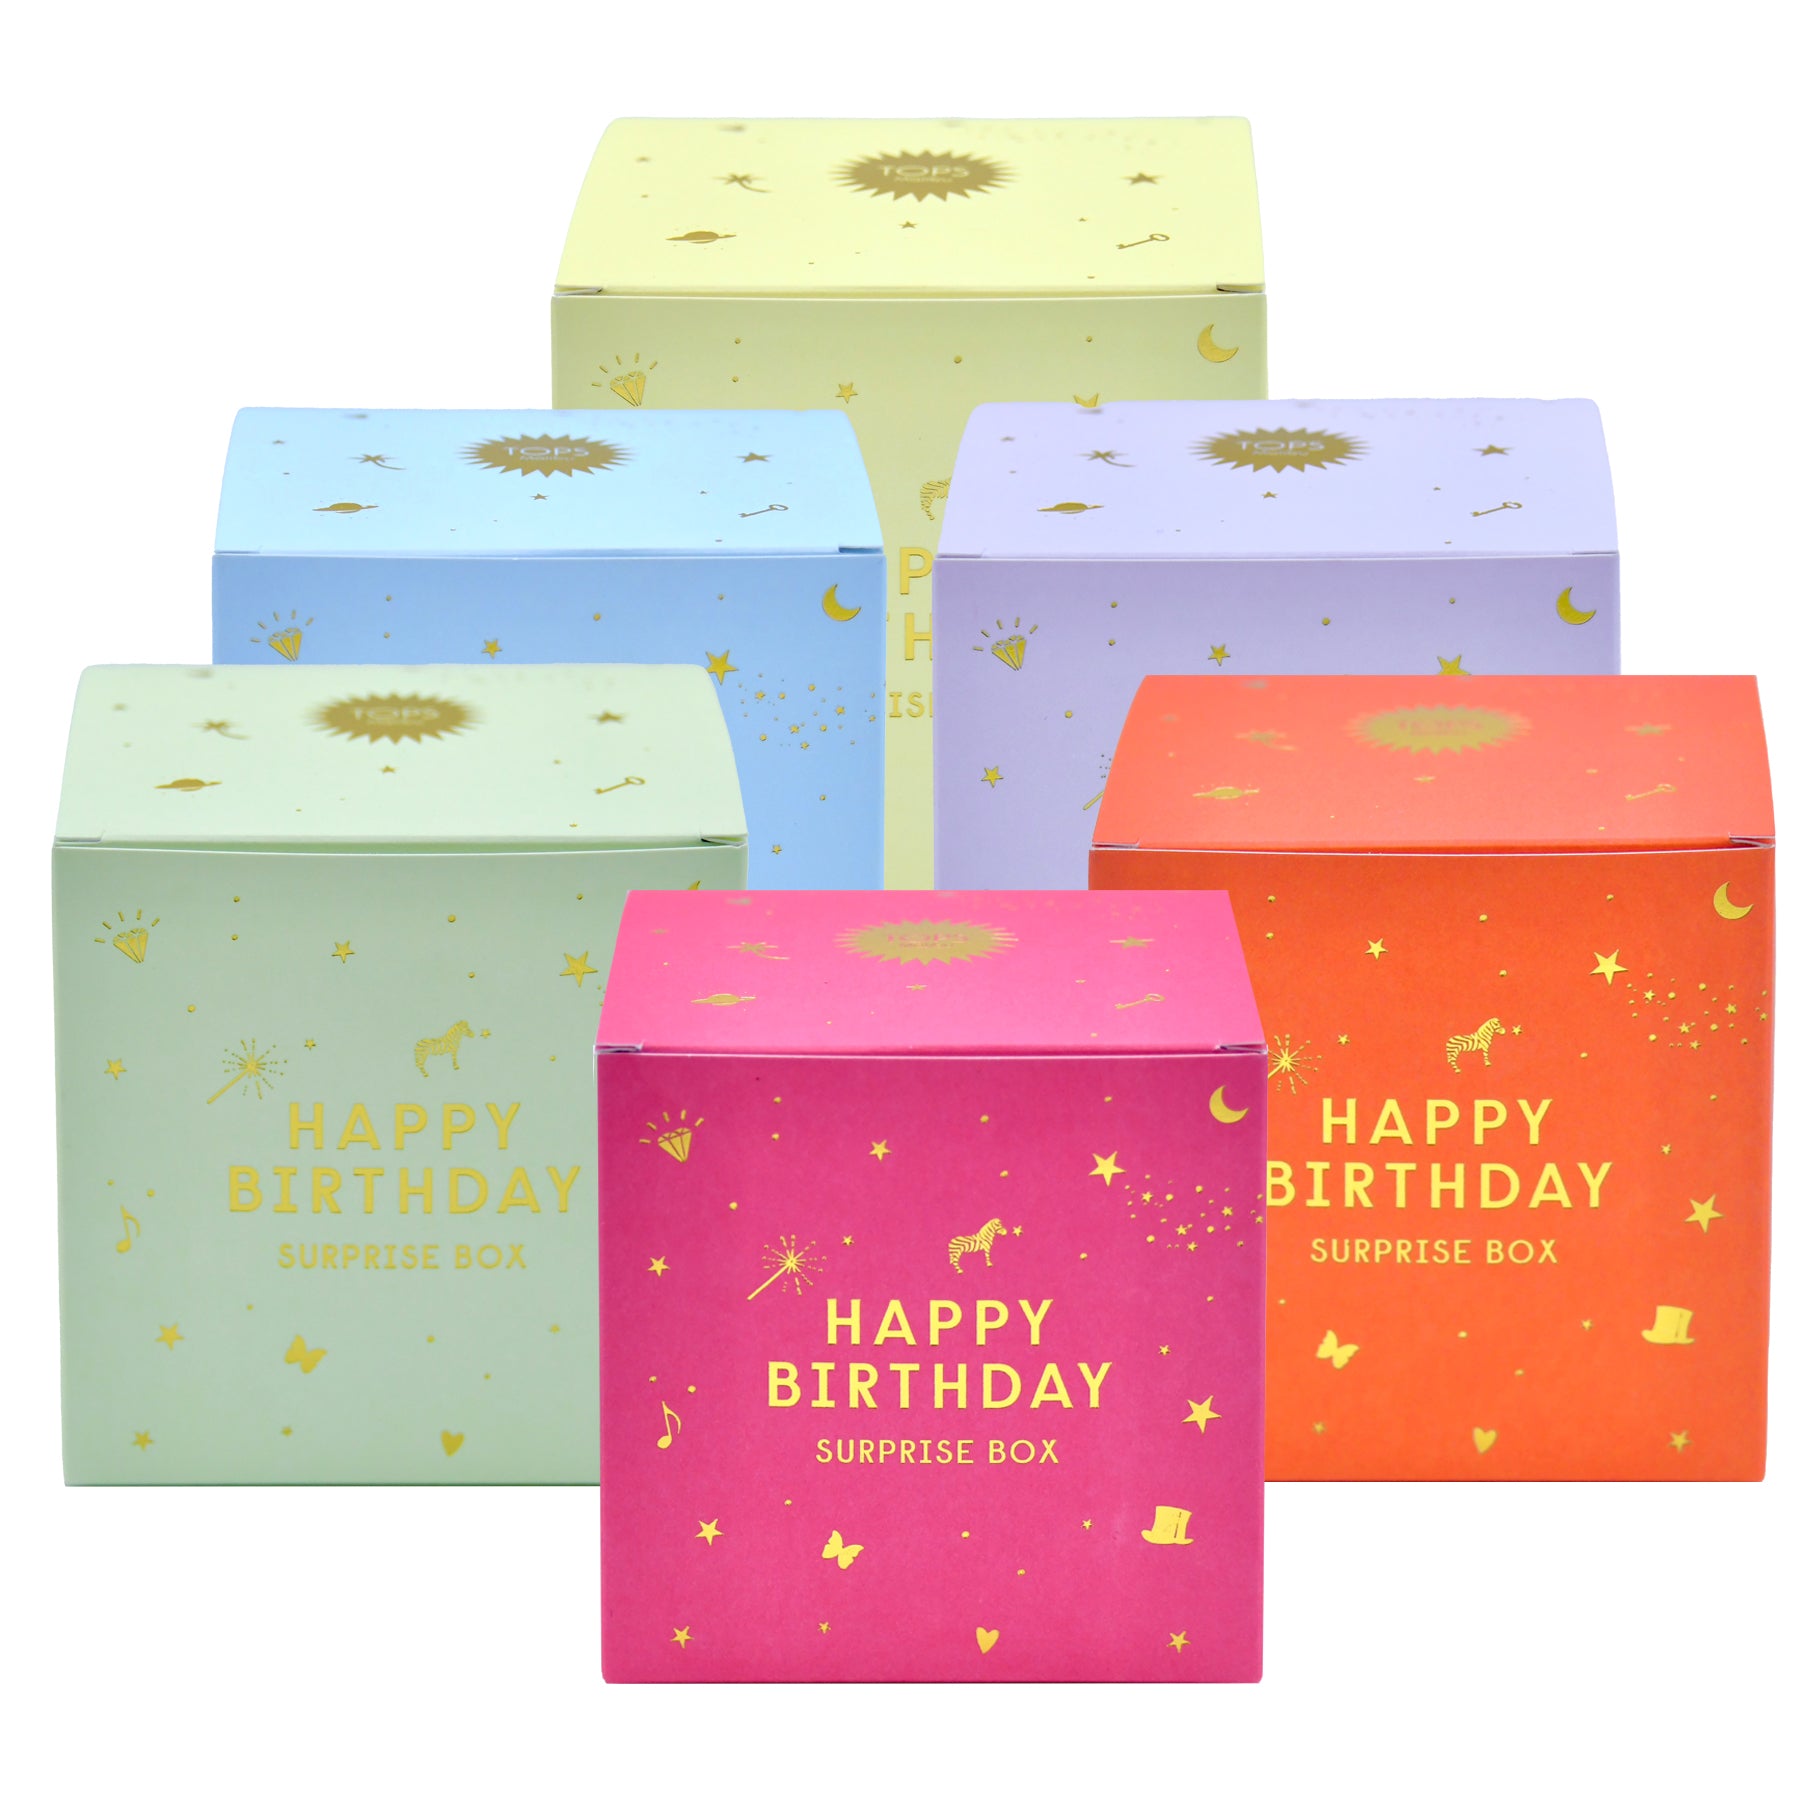 Luxe Spa Gift Box | Birthday Gift For Her | Heavenly Boxes | Reviews on  Judge.me